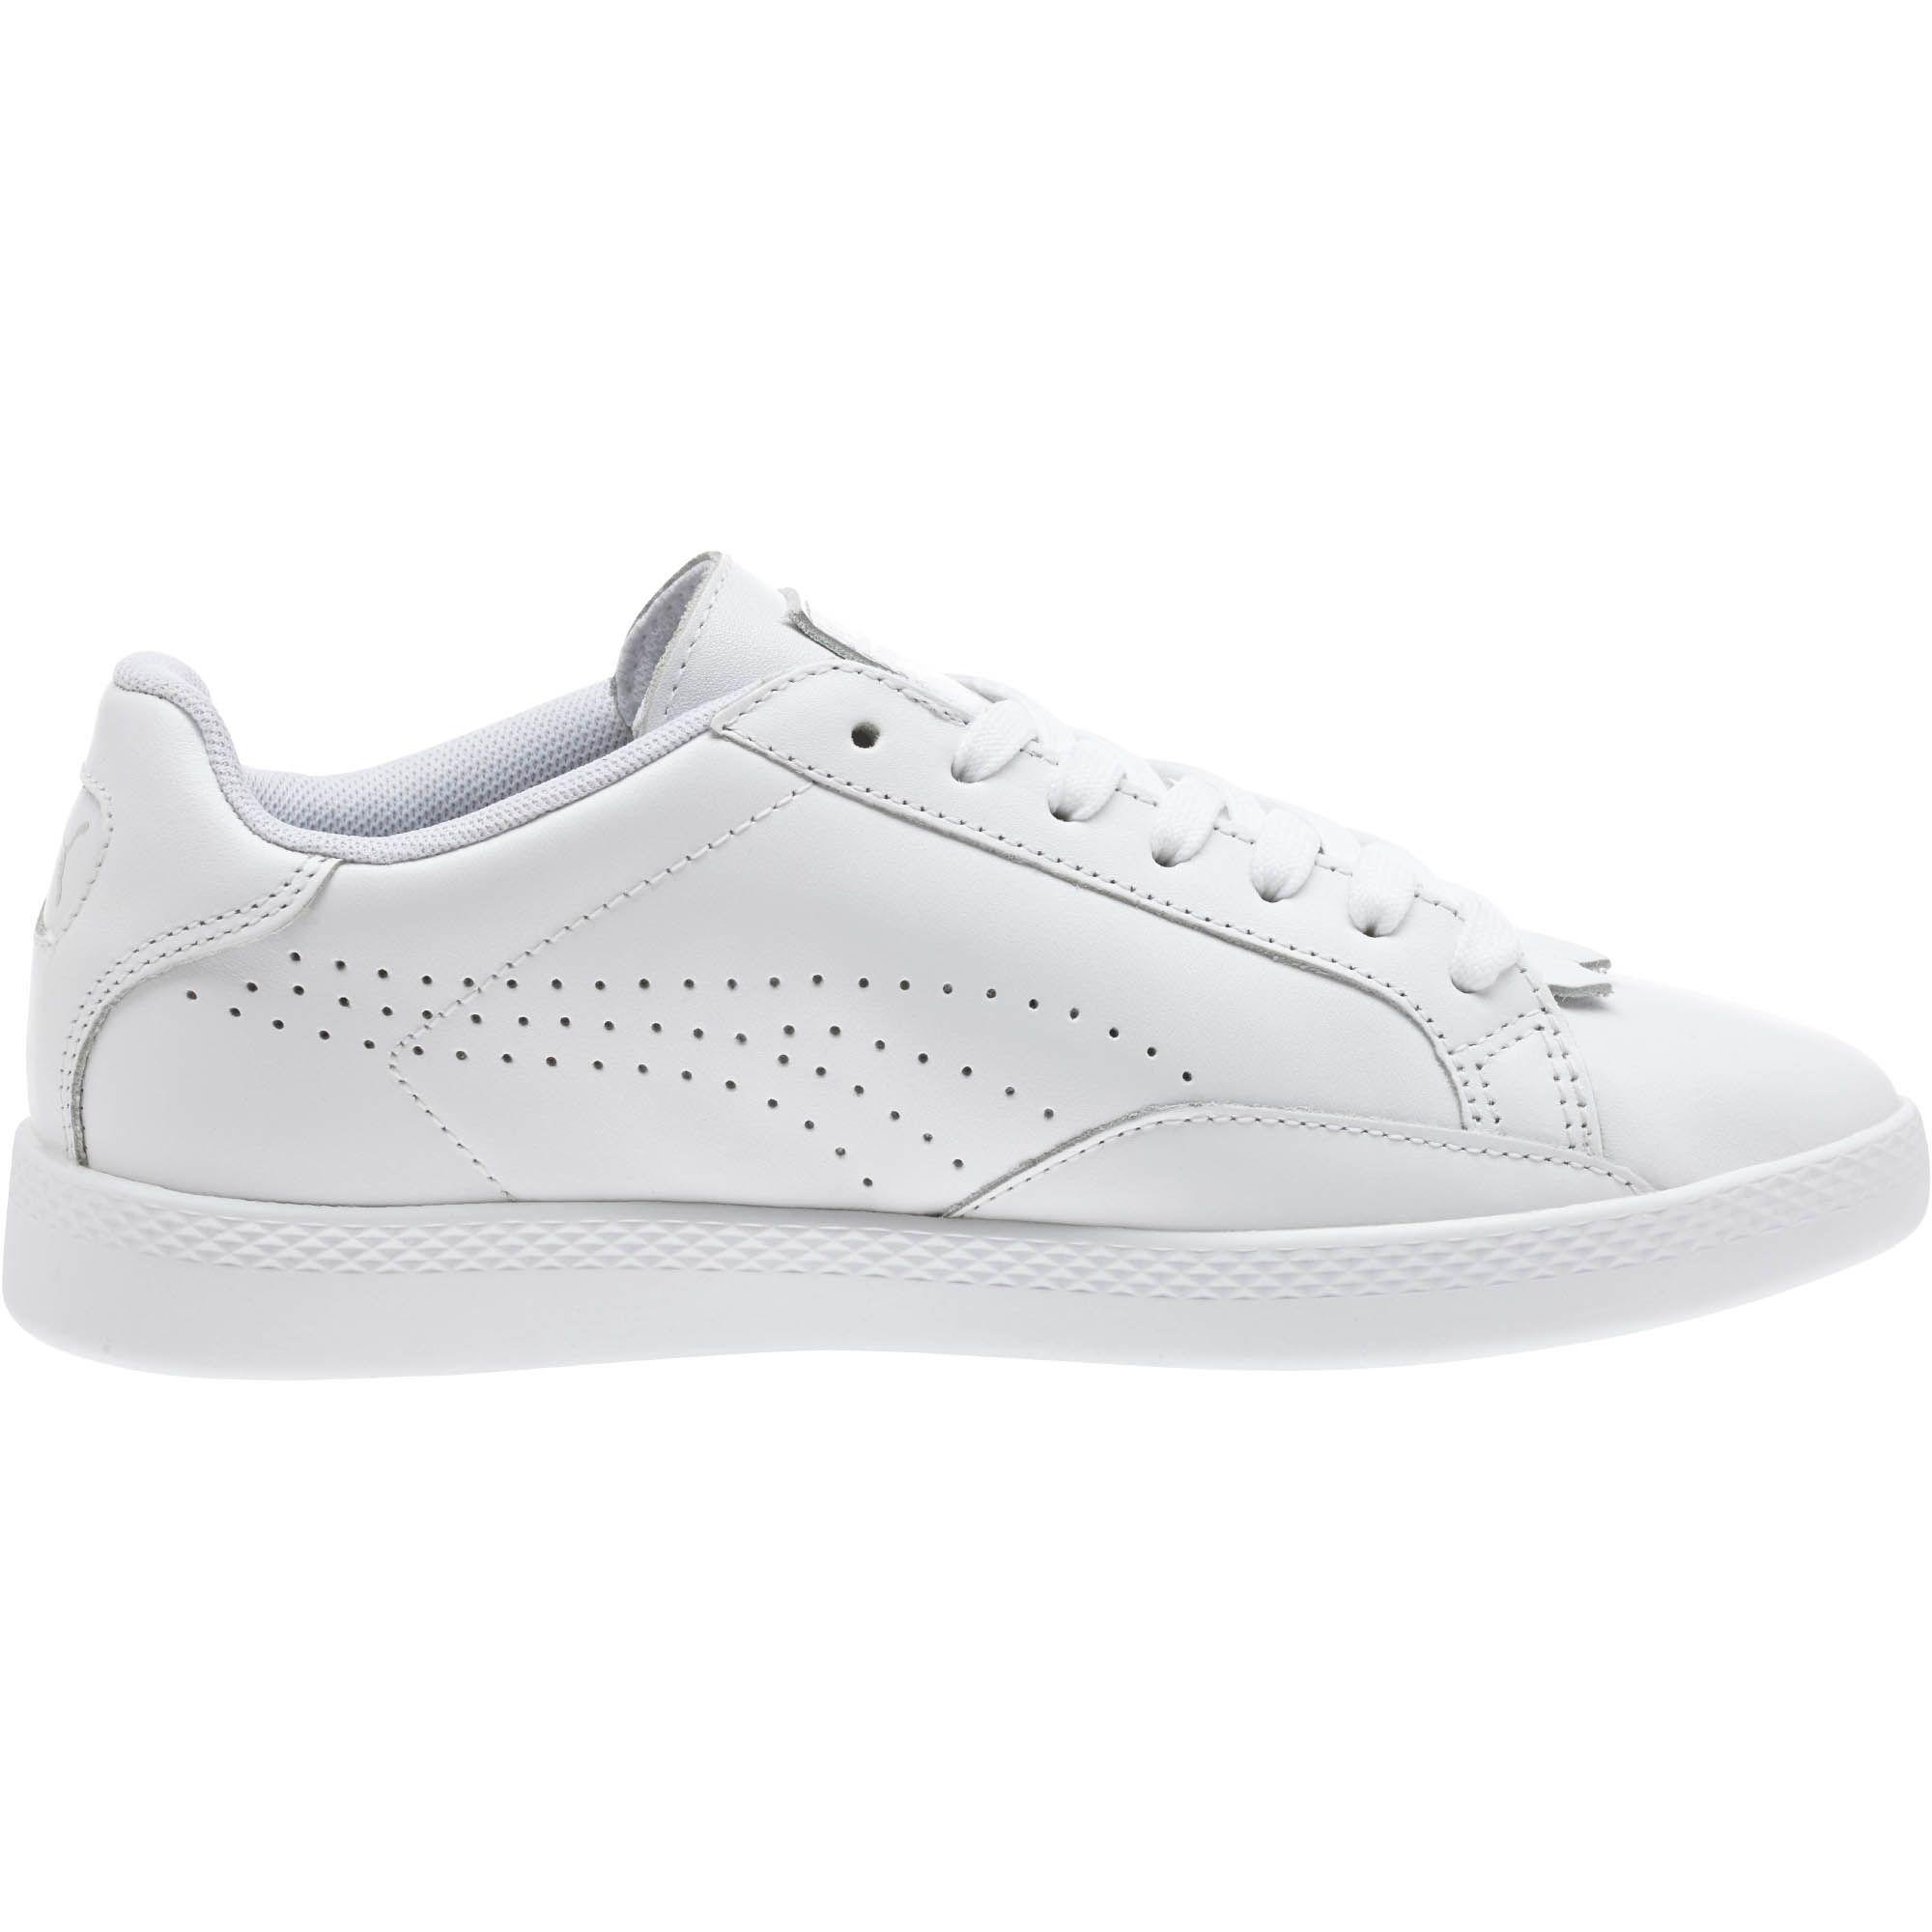 PUMA Match Lo Leather Reset Women's Sneakers in White - Lyst